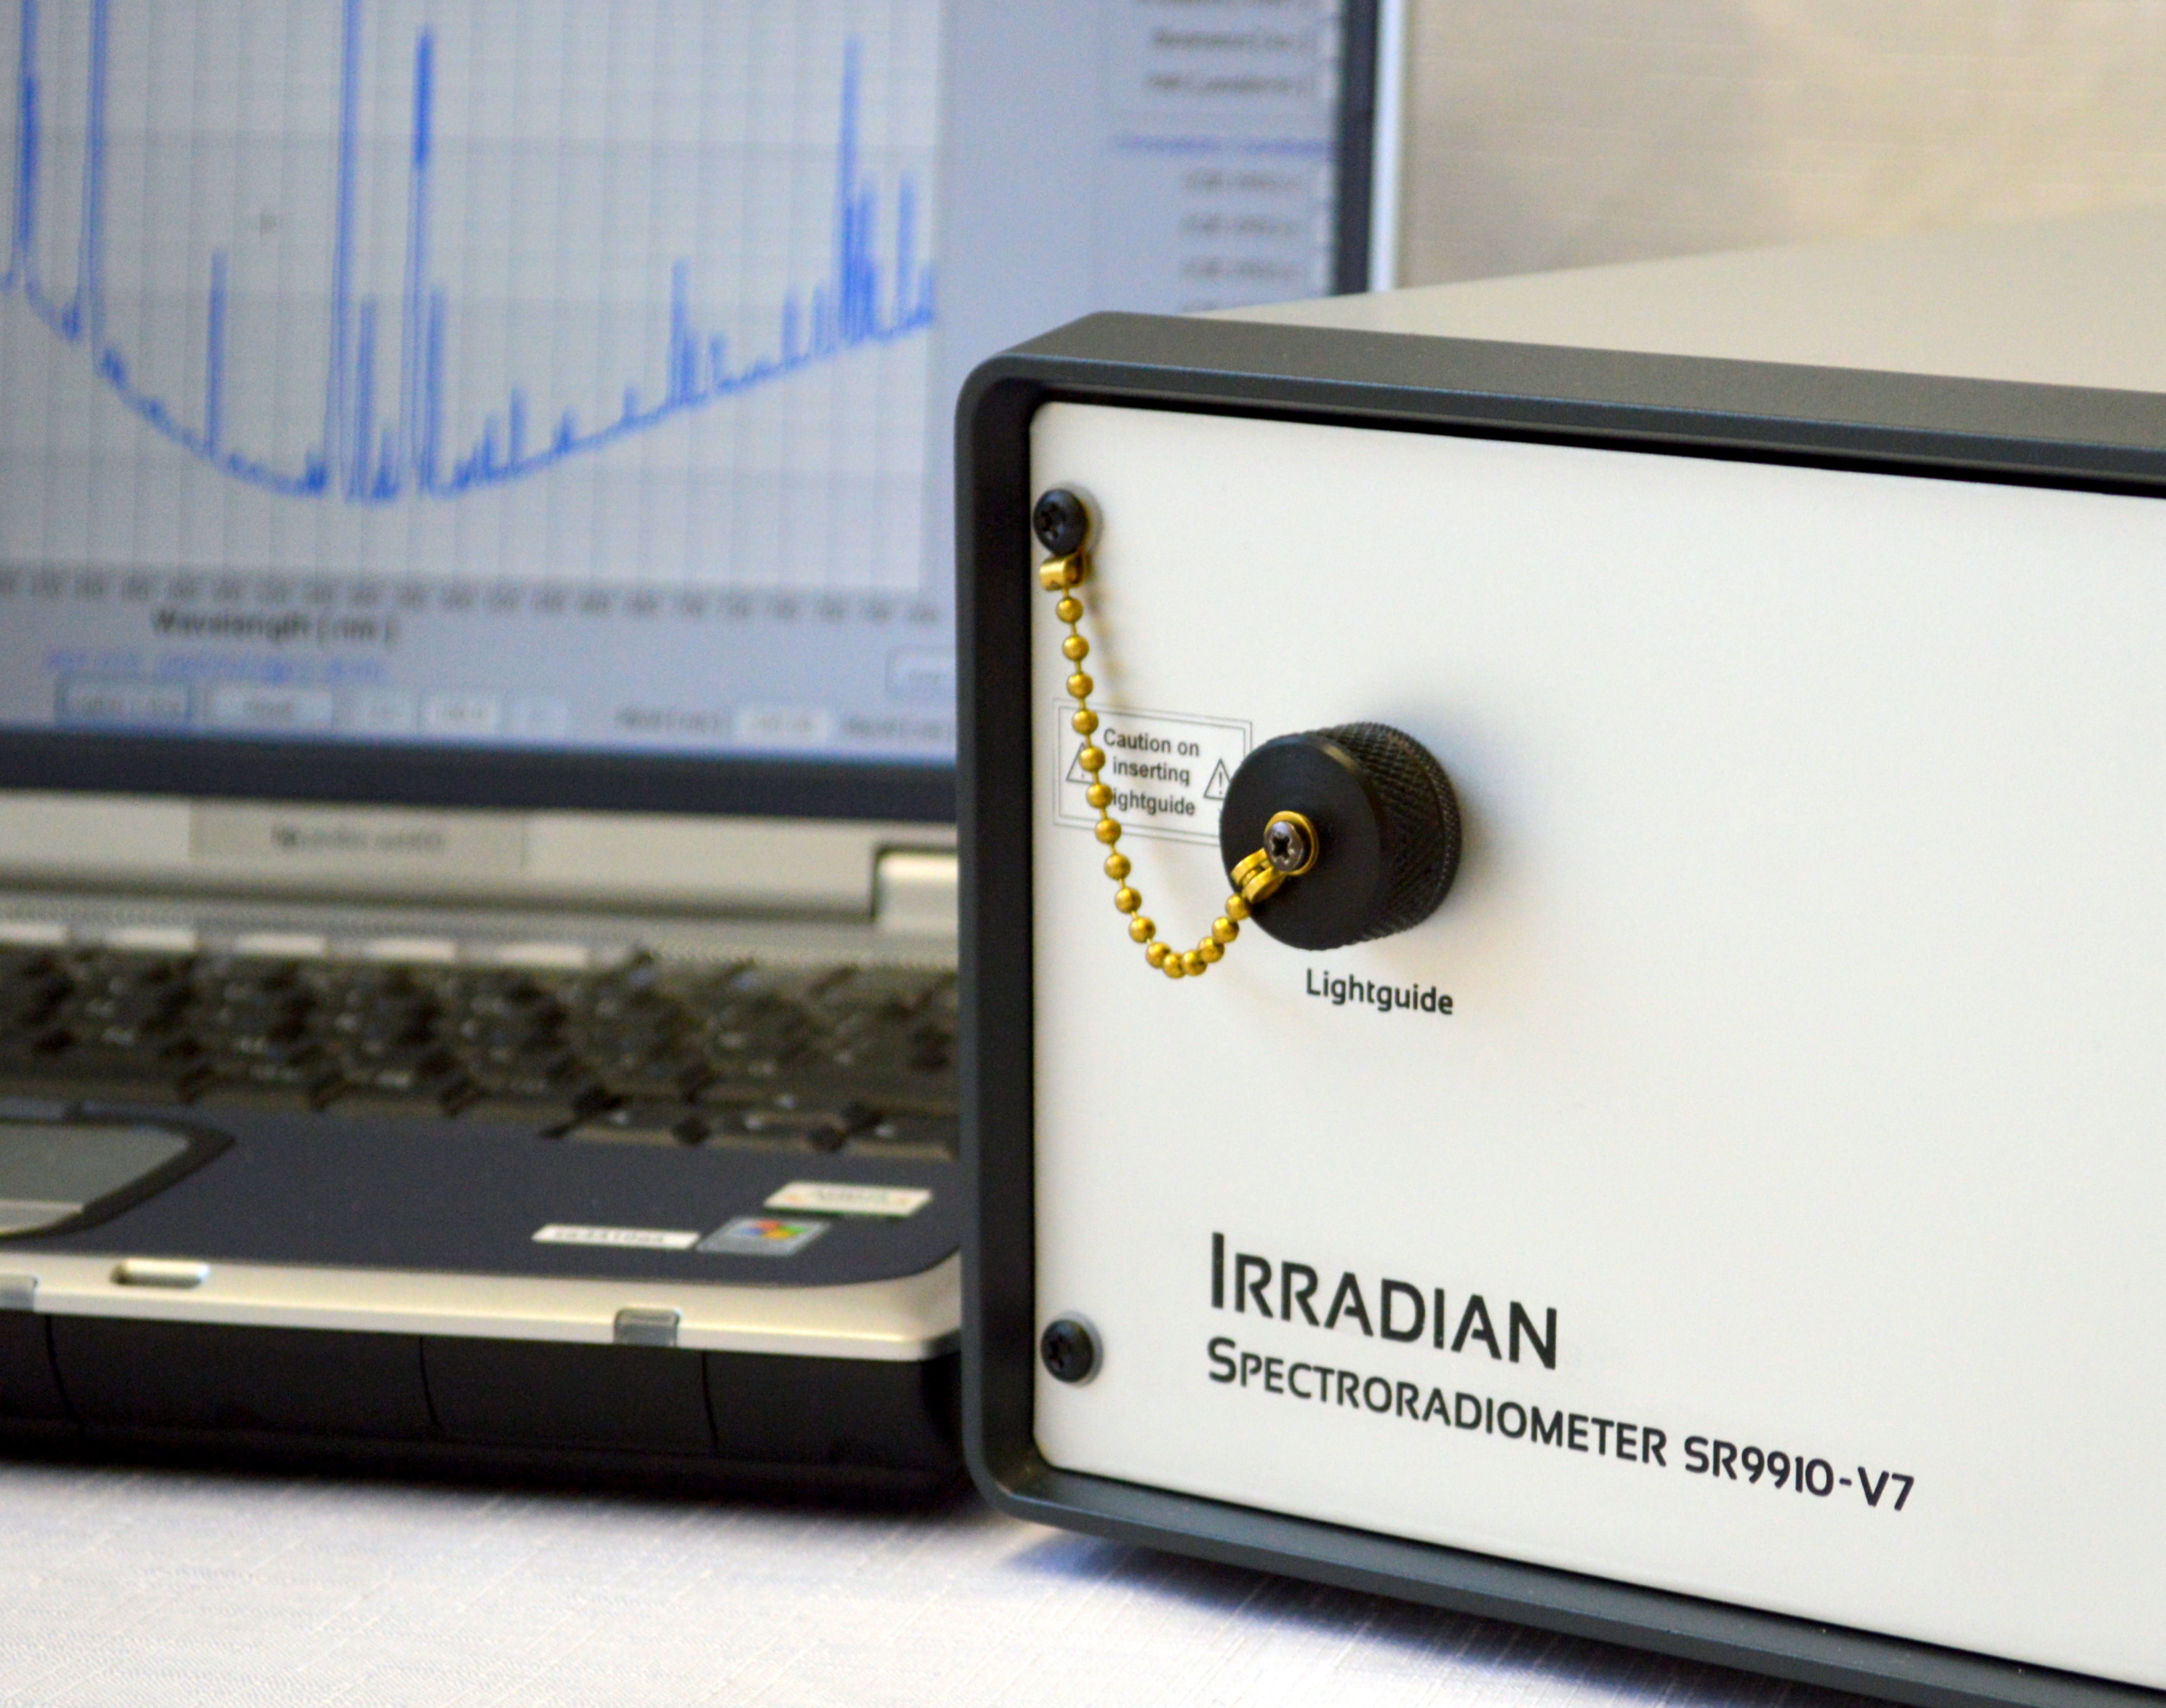 New software version available for Irradian spectroradiometer